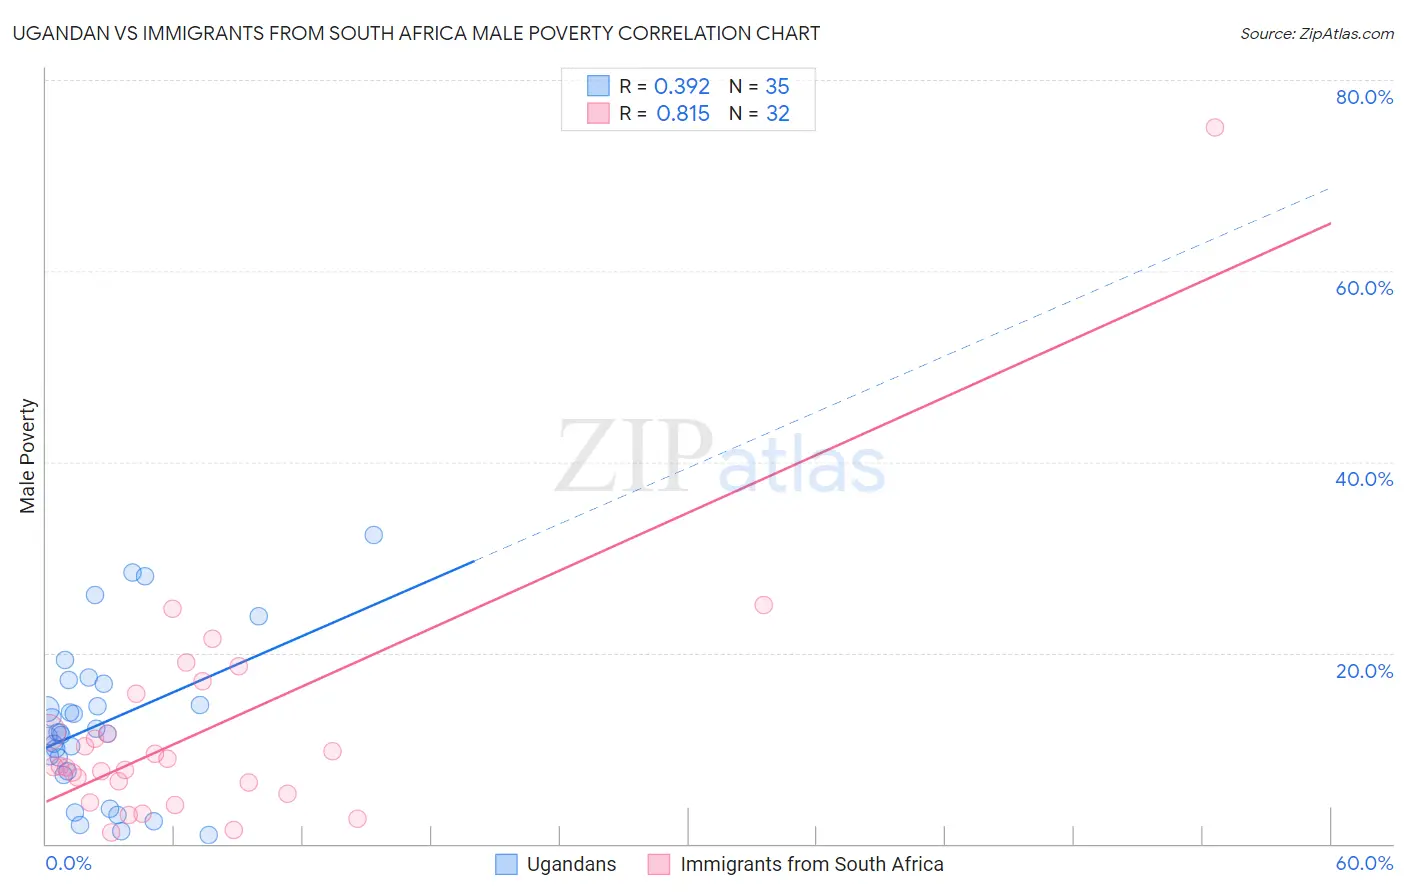 Ugandan vs Immigrants from South Africa Male Poverty